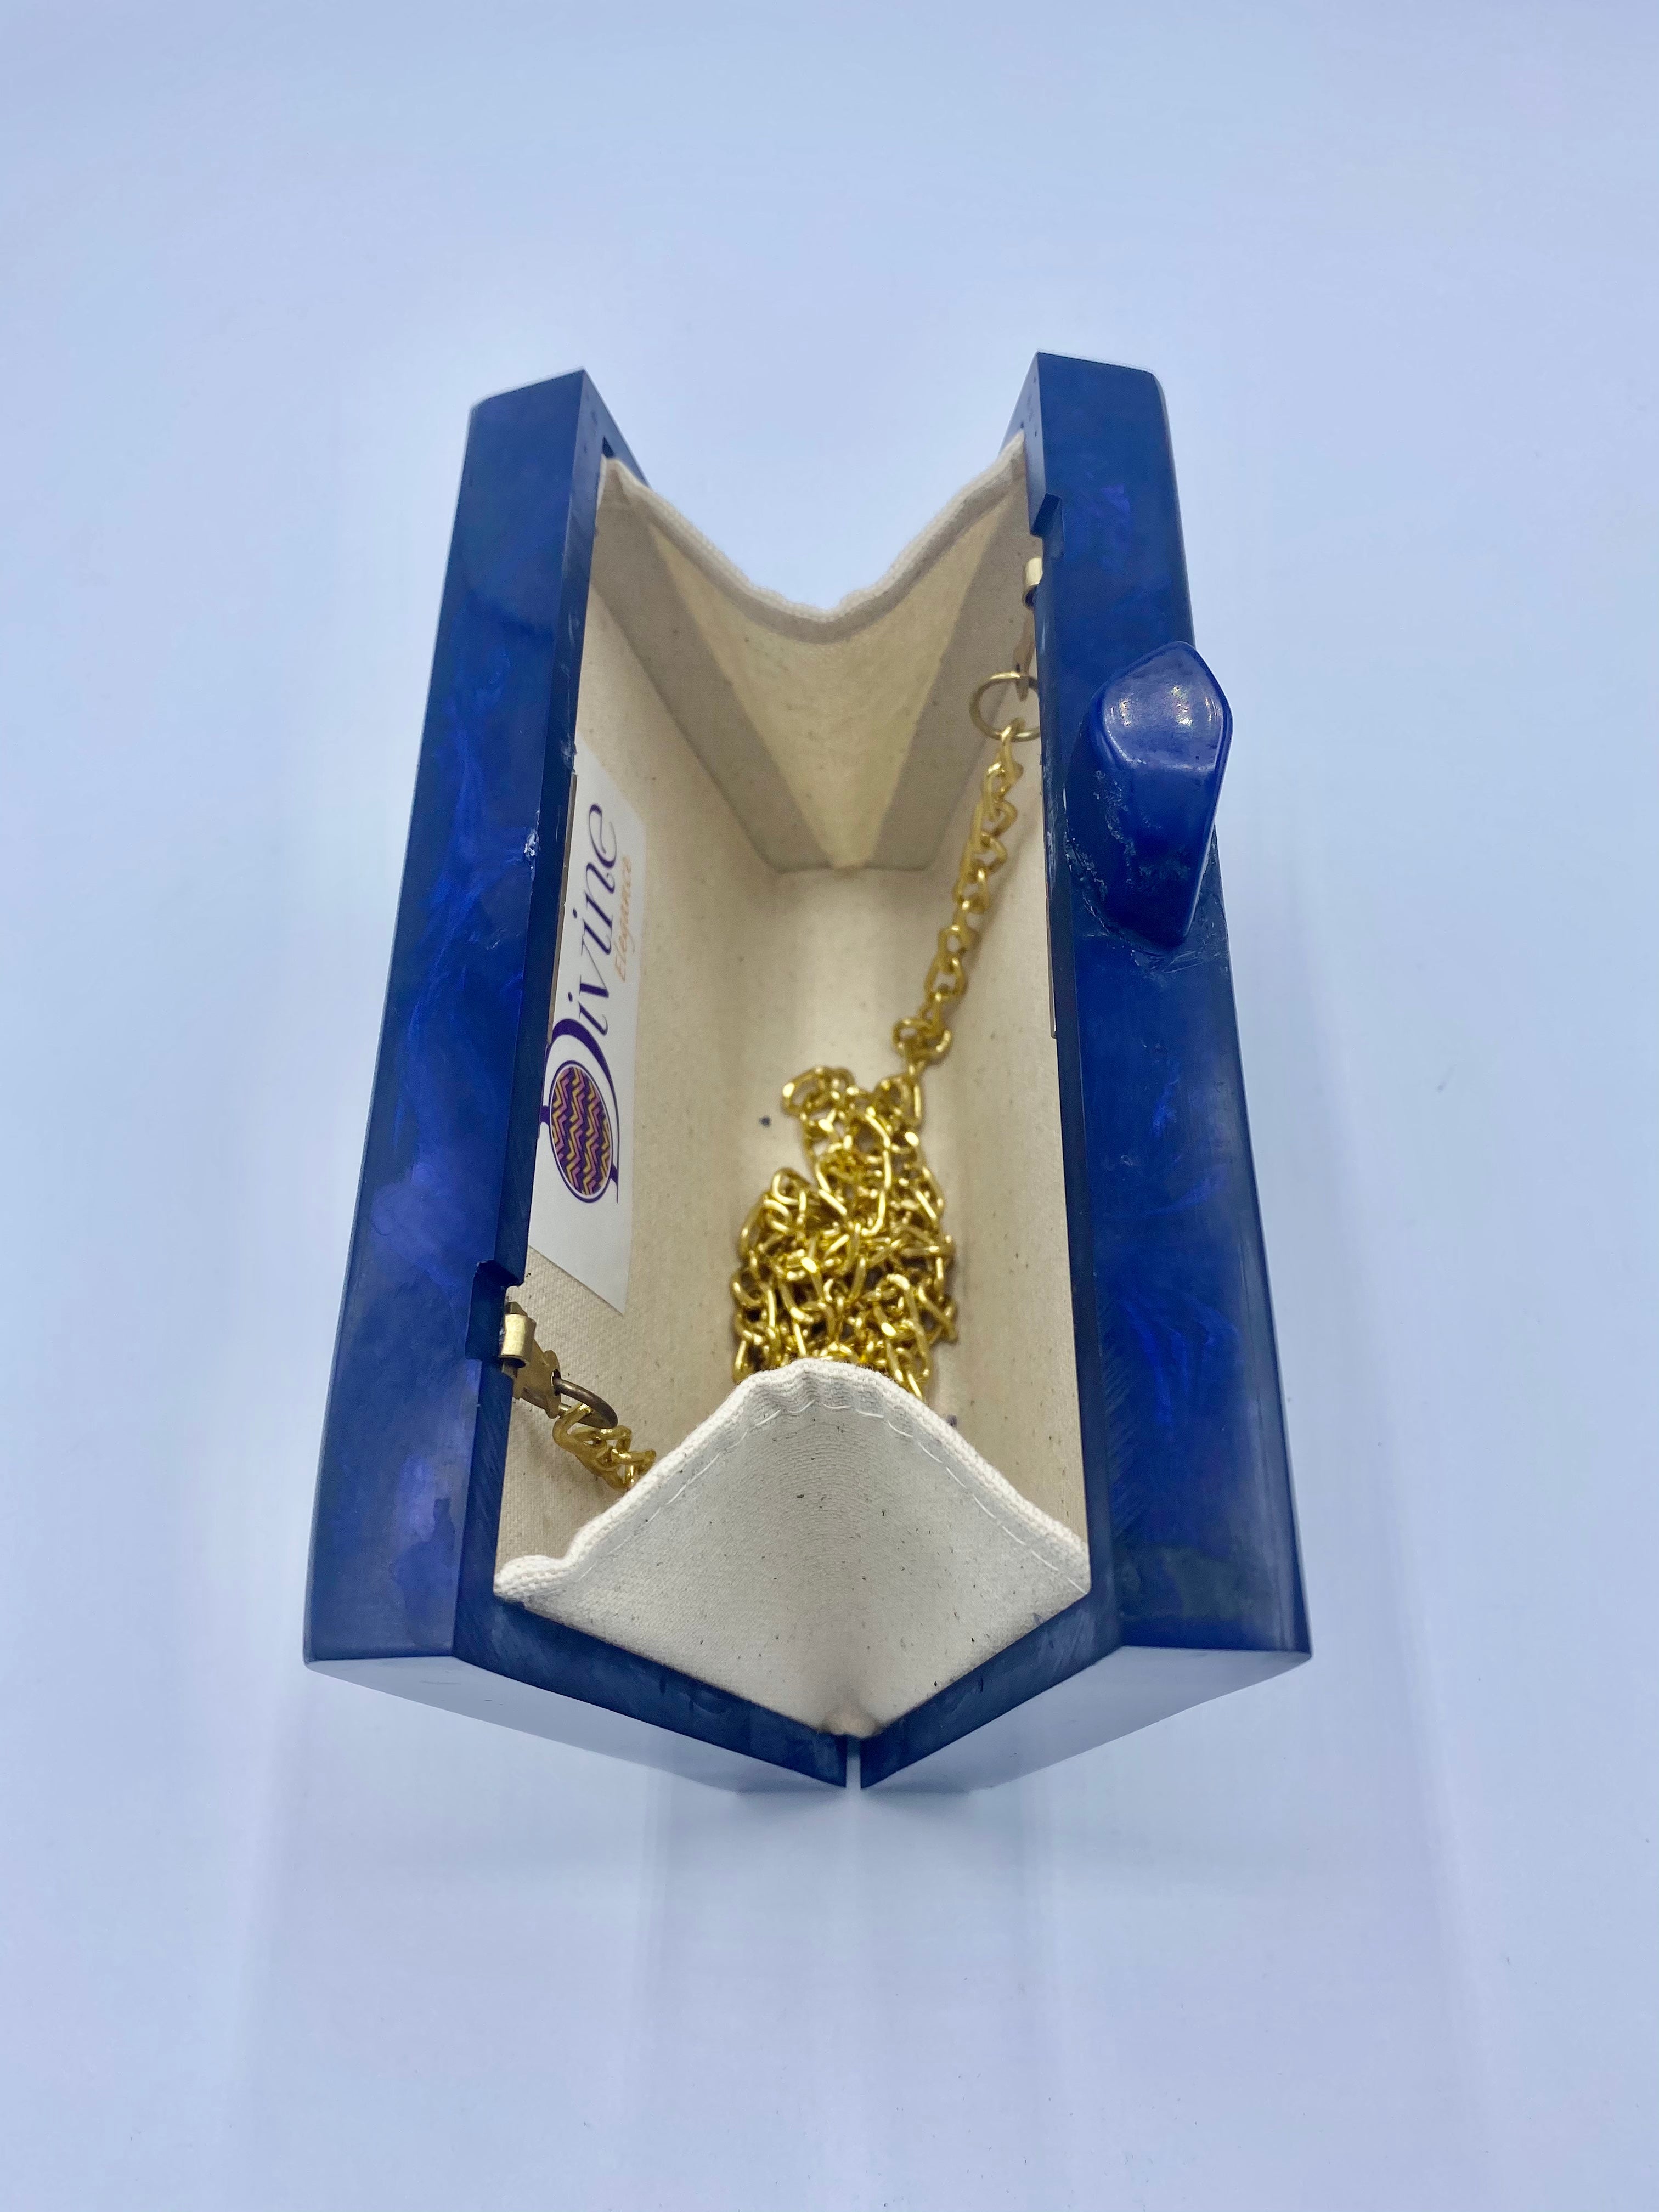 Handcrafted Triangle Resin with embellishment of pearls and stones Clutch